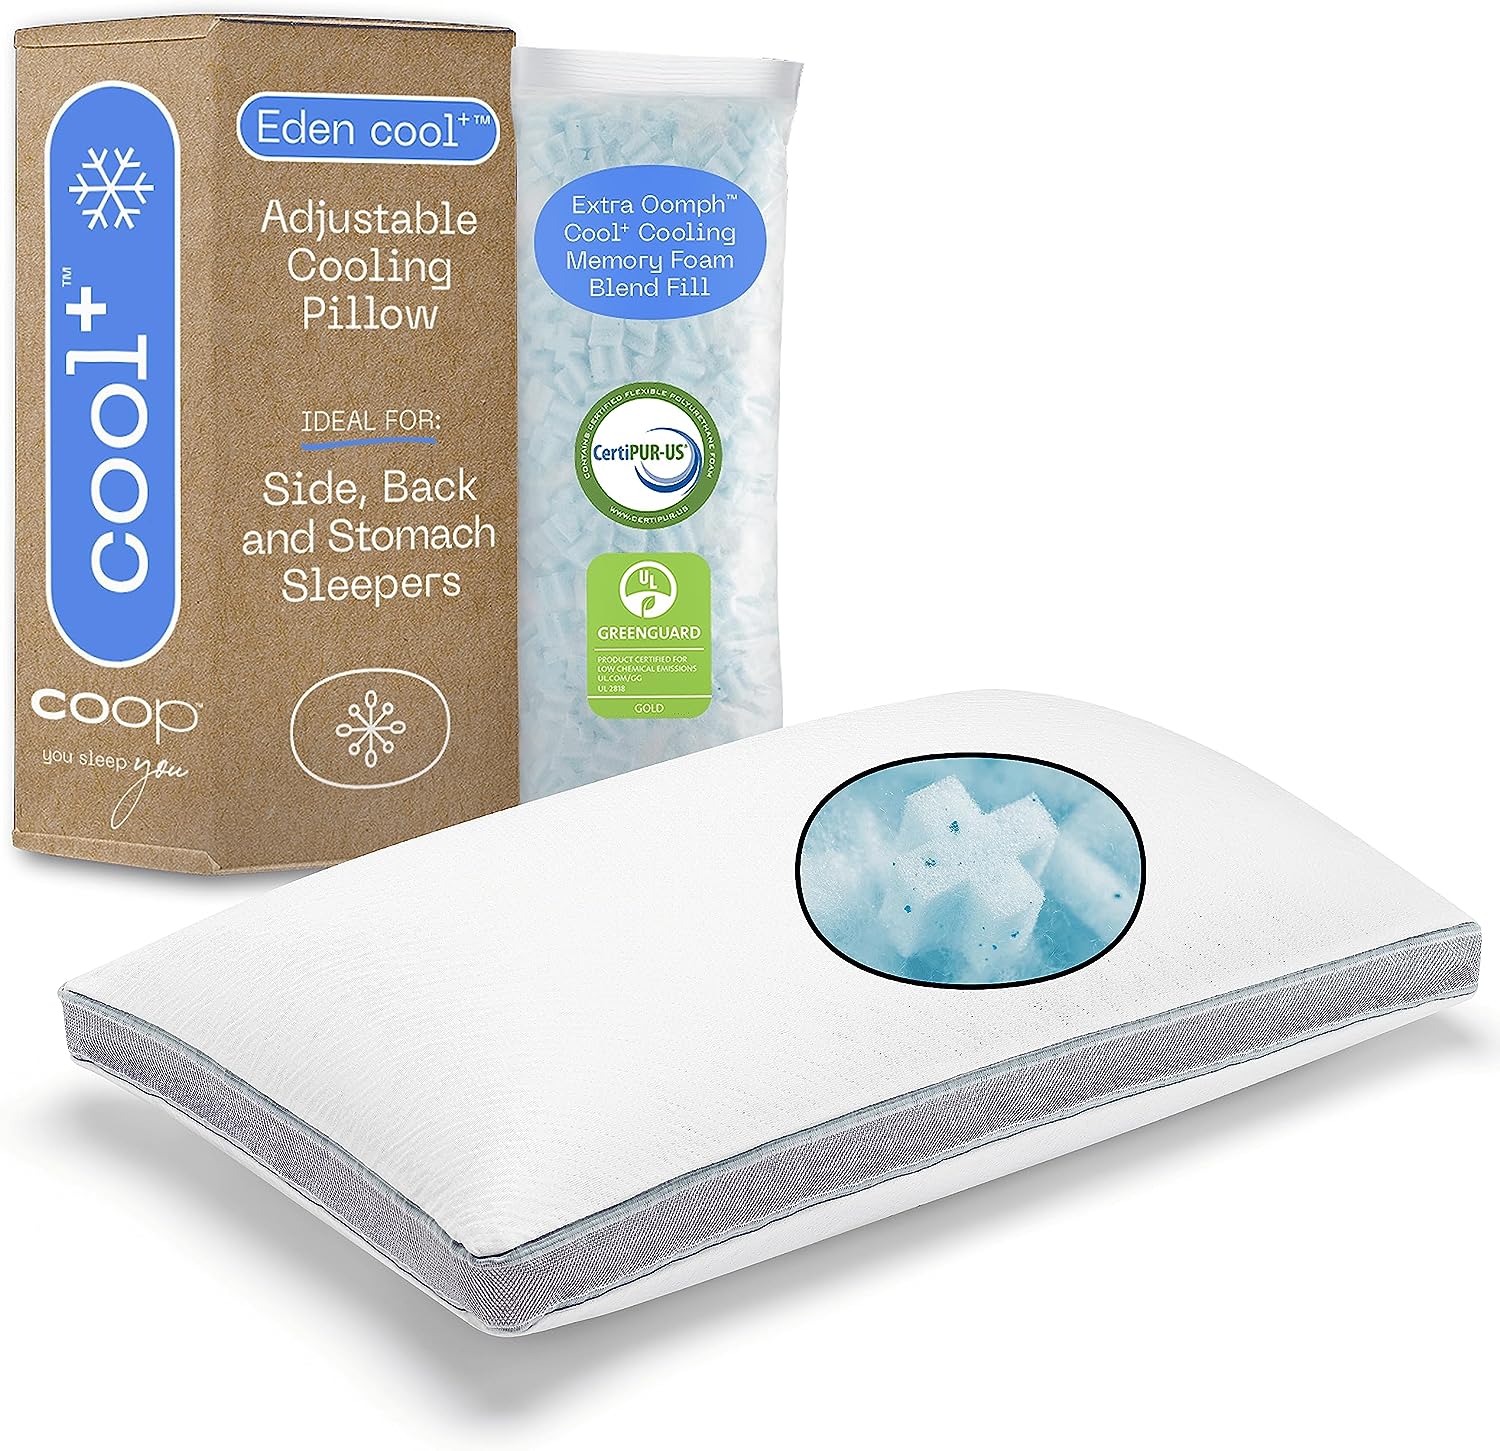 https://bigbigmart.com/wp-content/uploads/2023/08/Coop-Home-Goods-Eden-Cool-Pillow-Queen-Size-Plus-Shaped-Memory-Foam-Pillows-with-Cooling-Gel-Back-Stomach-or-Side-Sleeper-Pillow-Adjustable-Neck-Support-for-Sleeping-CertiPUR-US-GREENGUARD-Gold.jpg